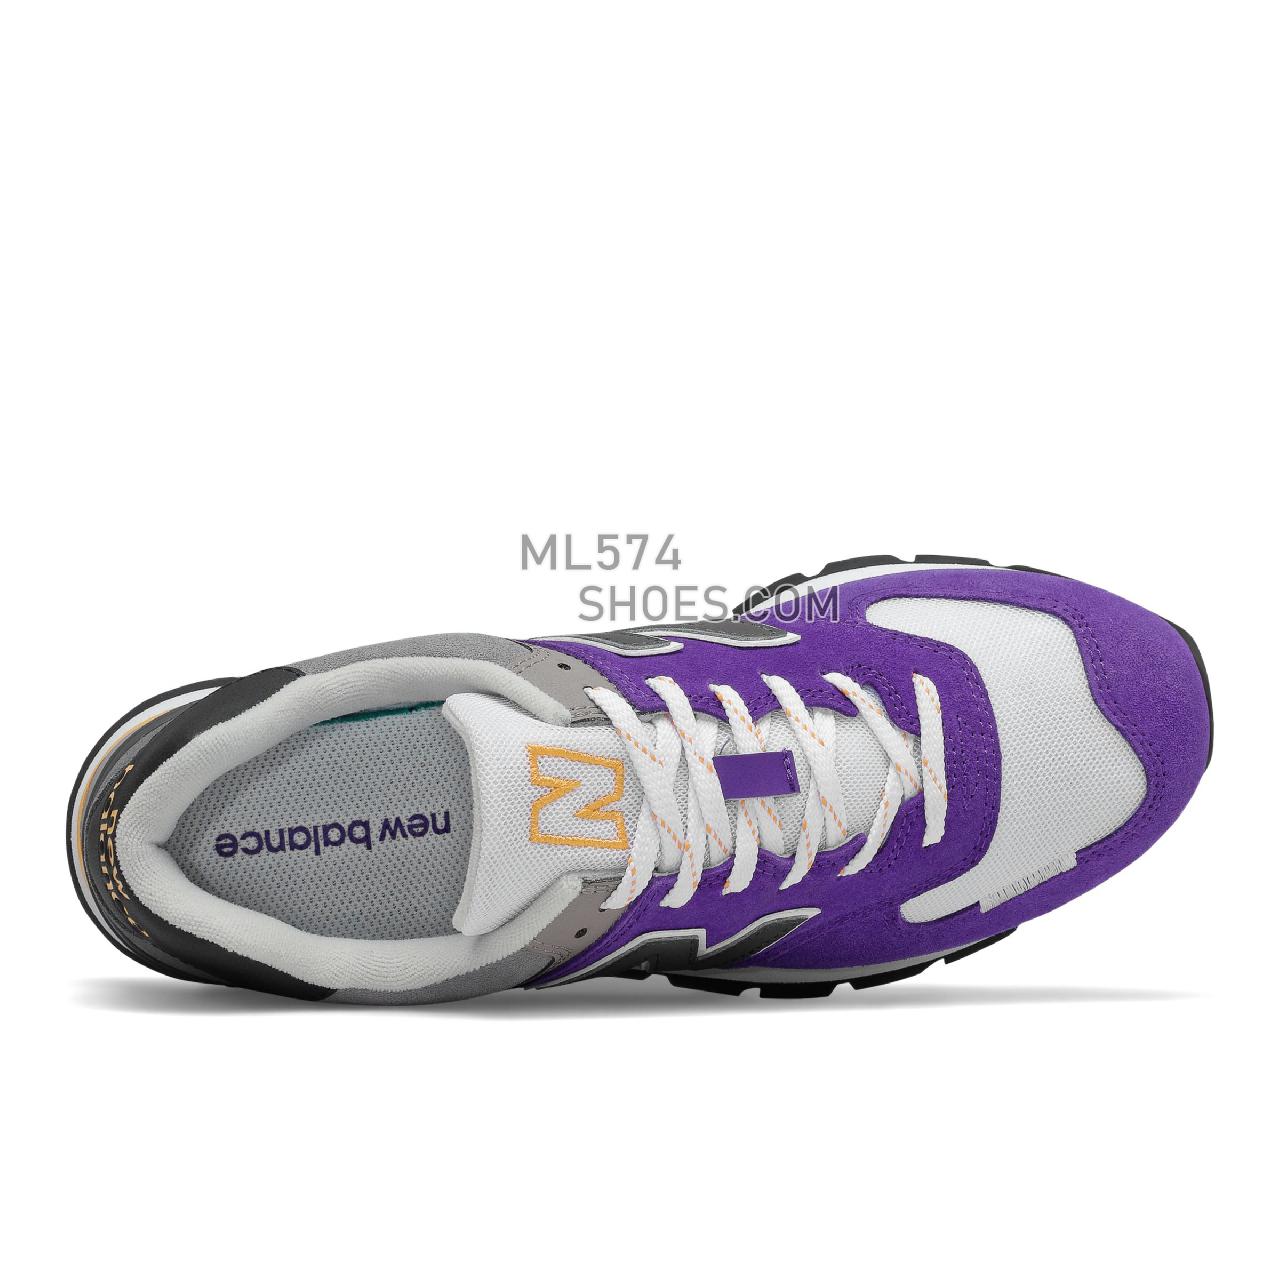 New Balance 574 Rugged - Men's Classic Sneakers - Prism Purple with Marblehead - ML574DTB